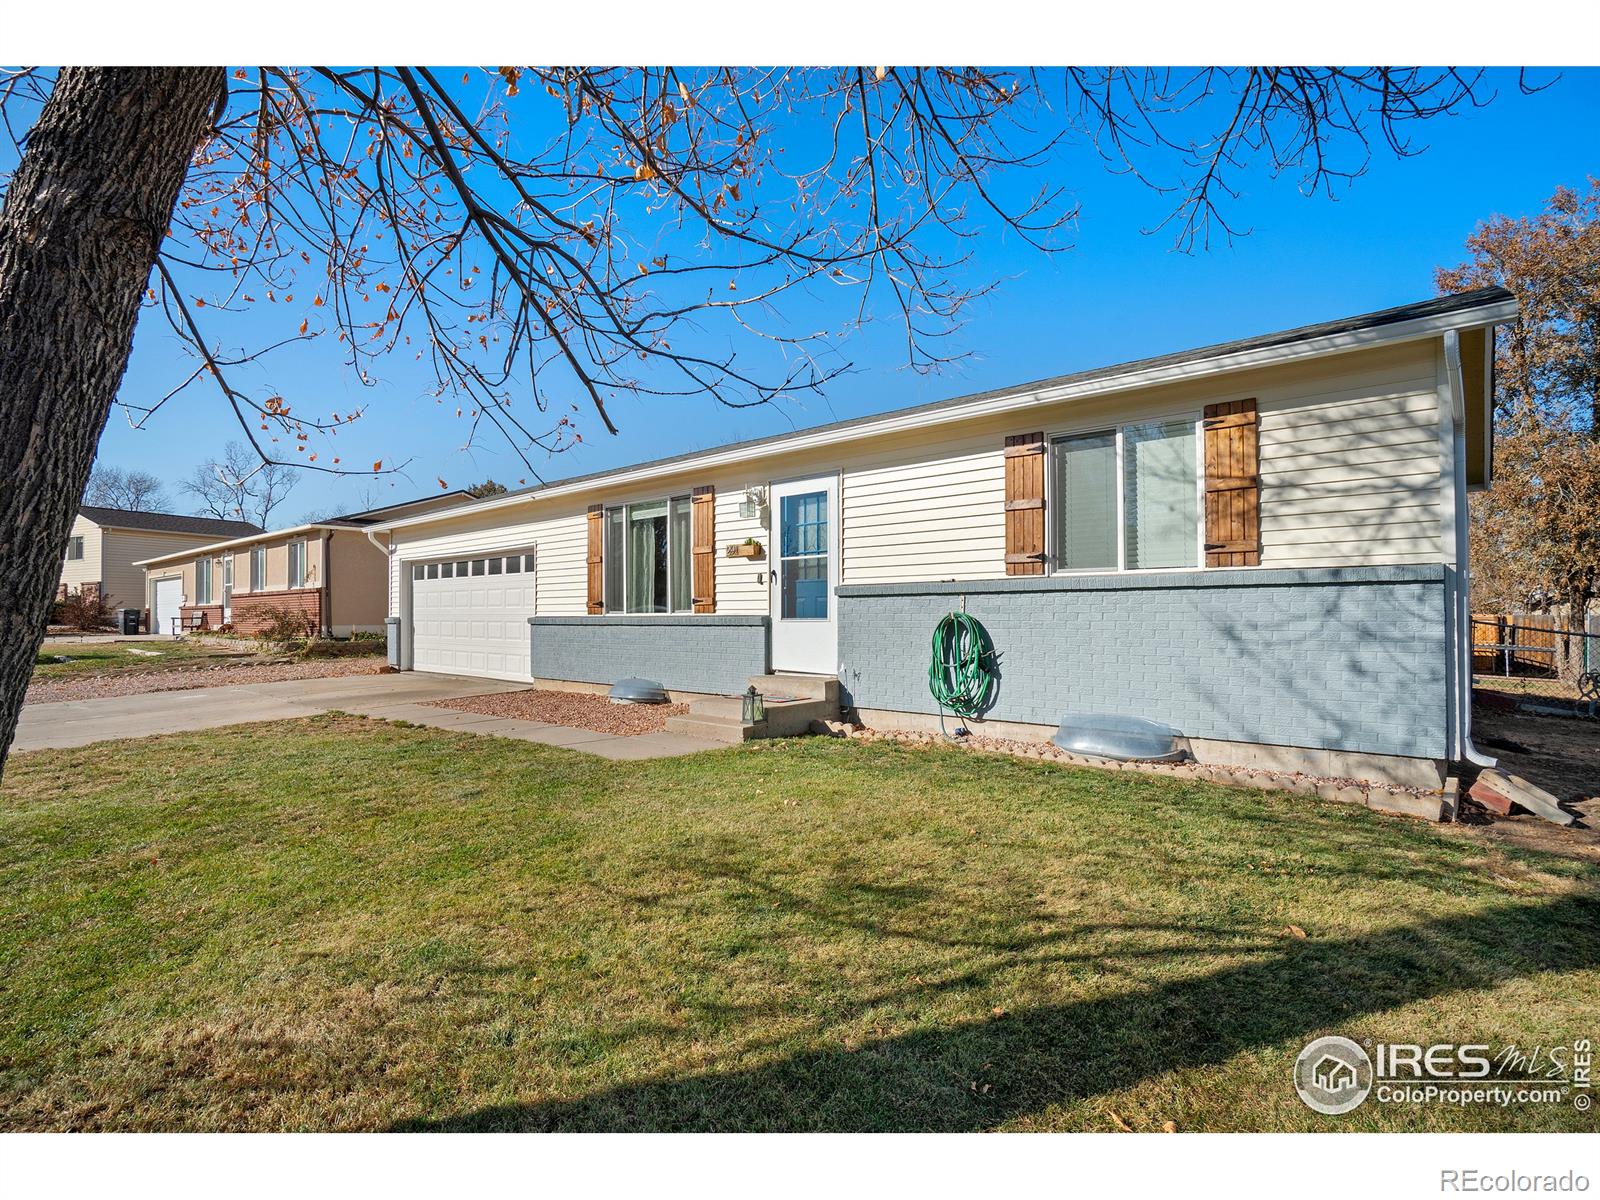 2915 17th, Greeley, CO